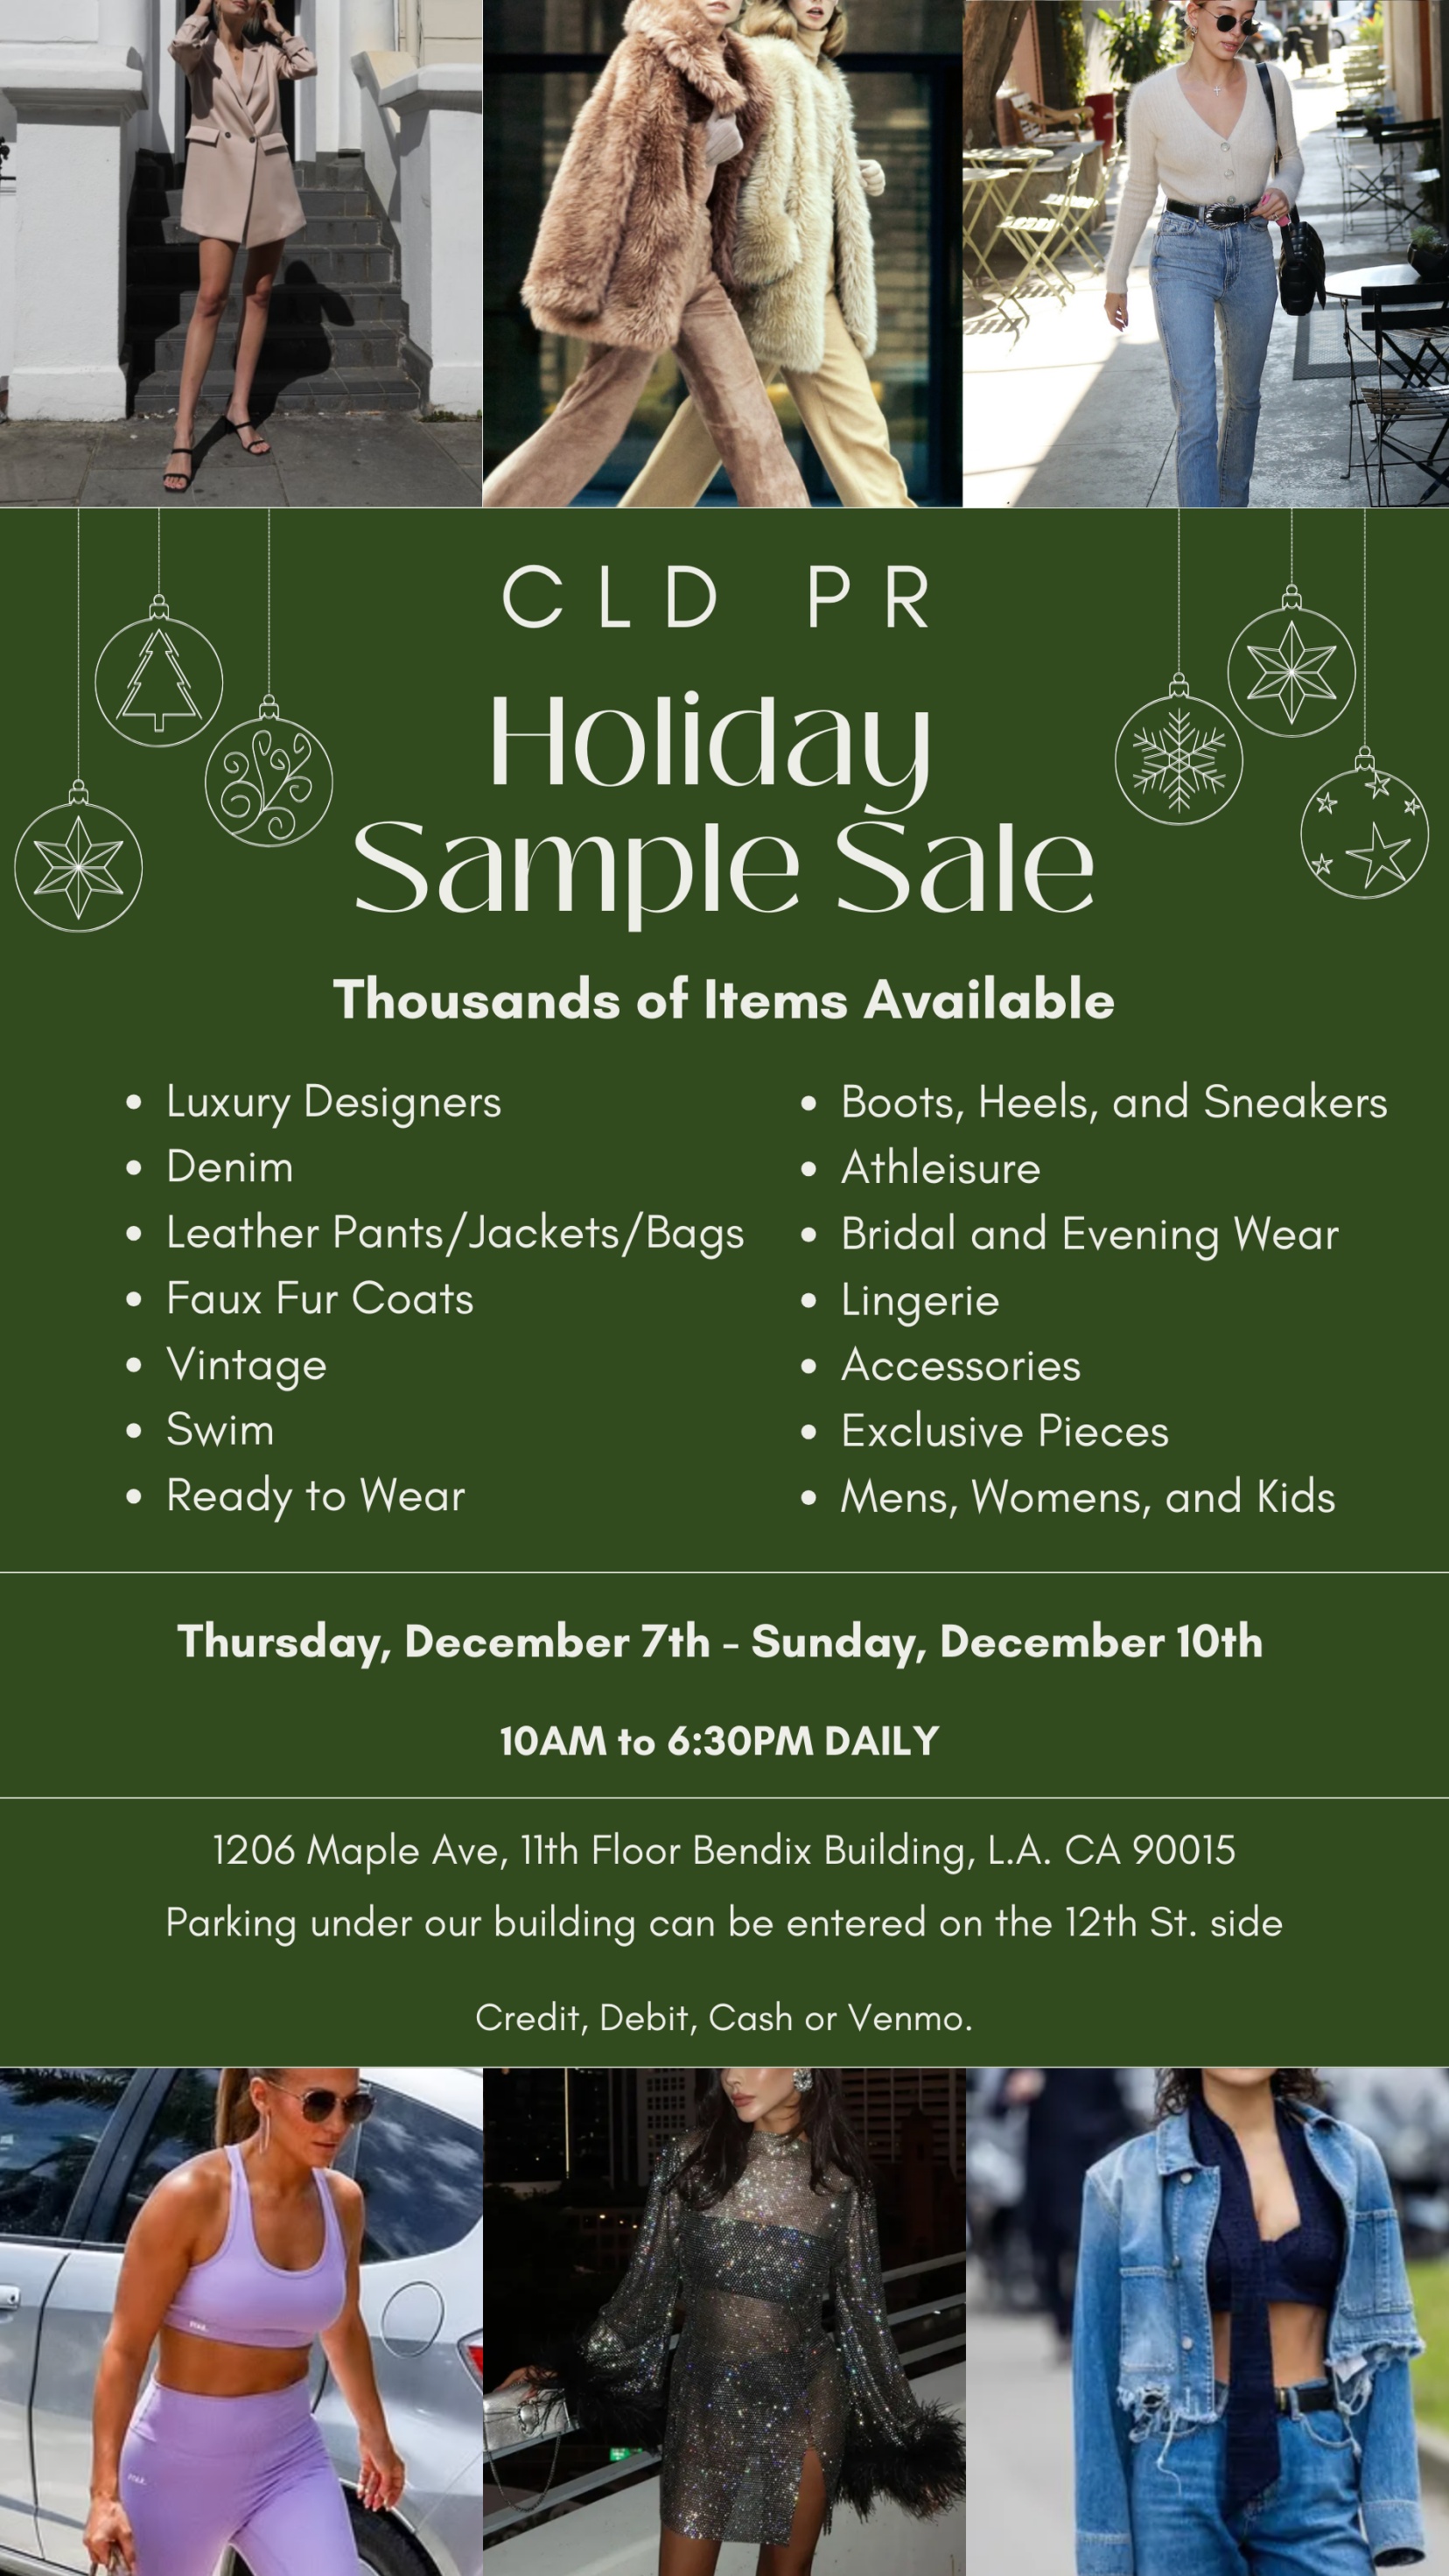 CLD PR Holiday Sample Sale 